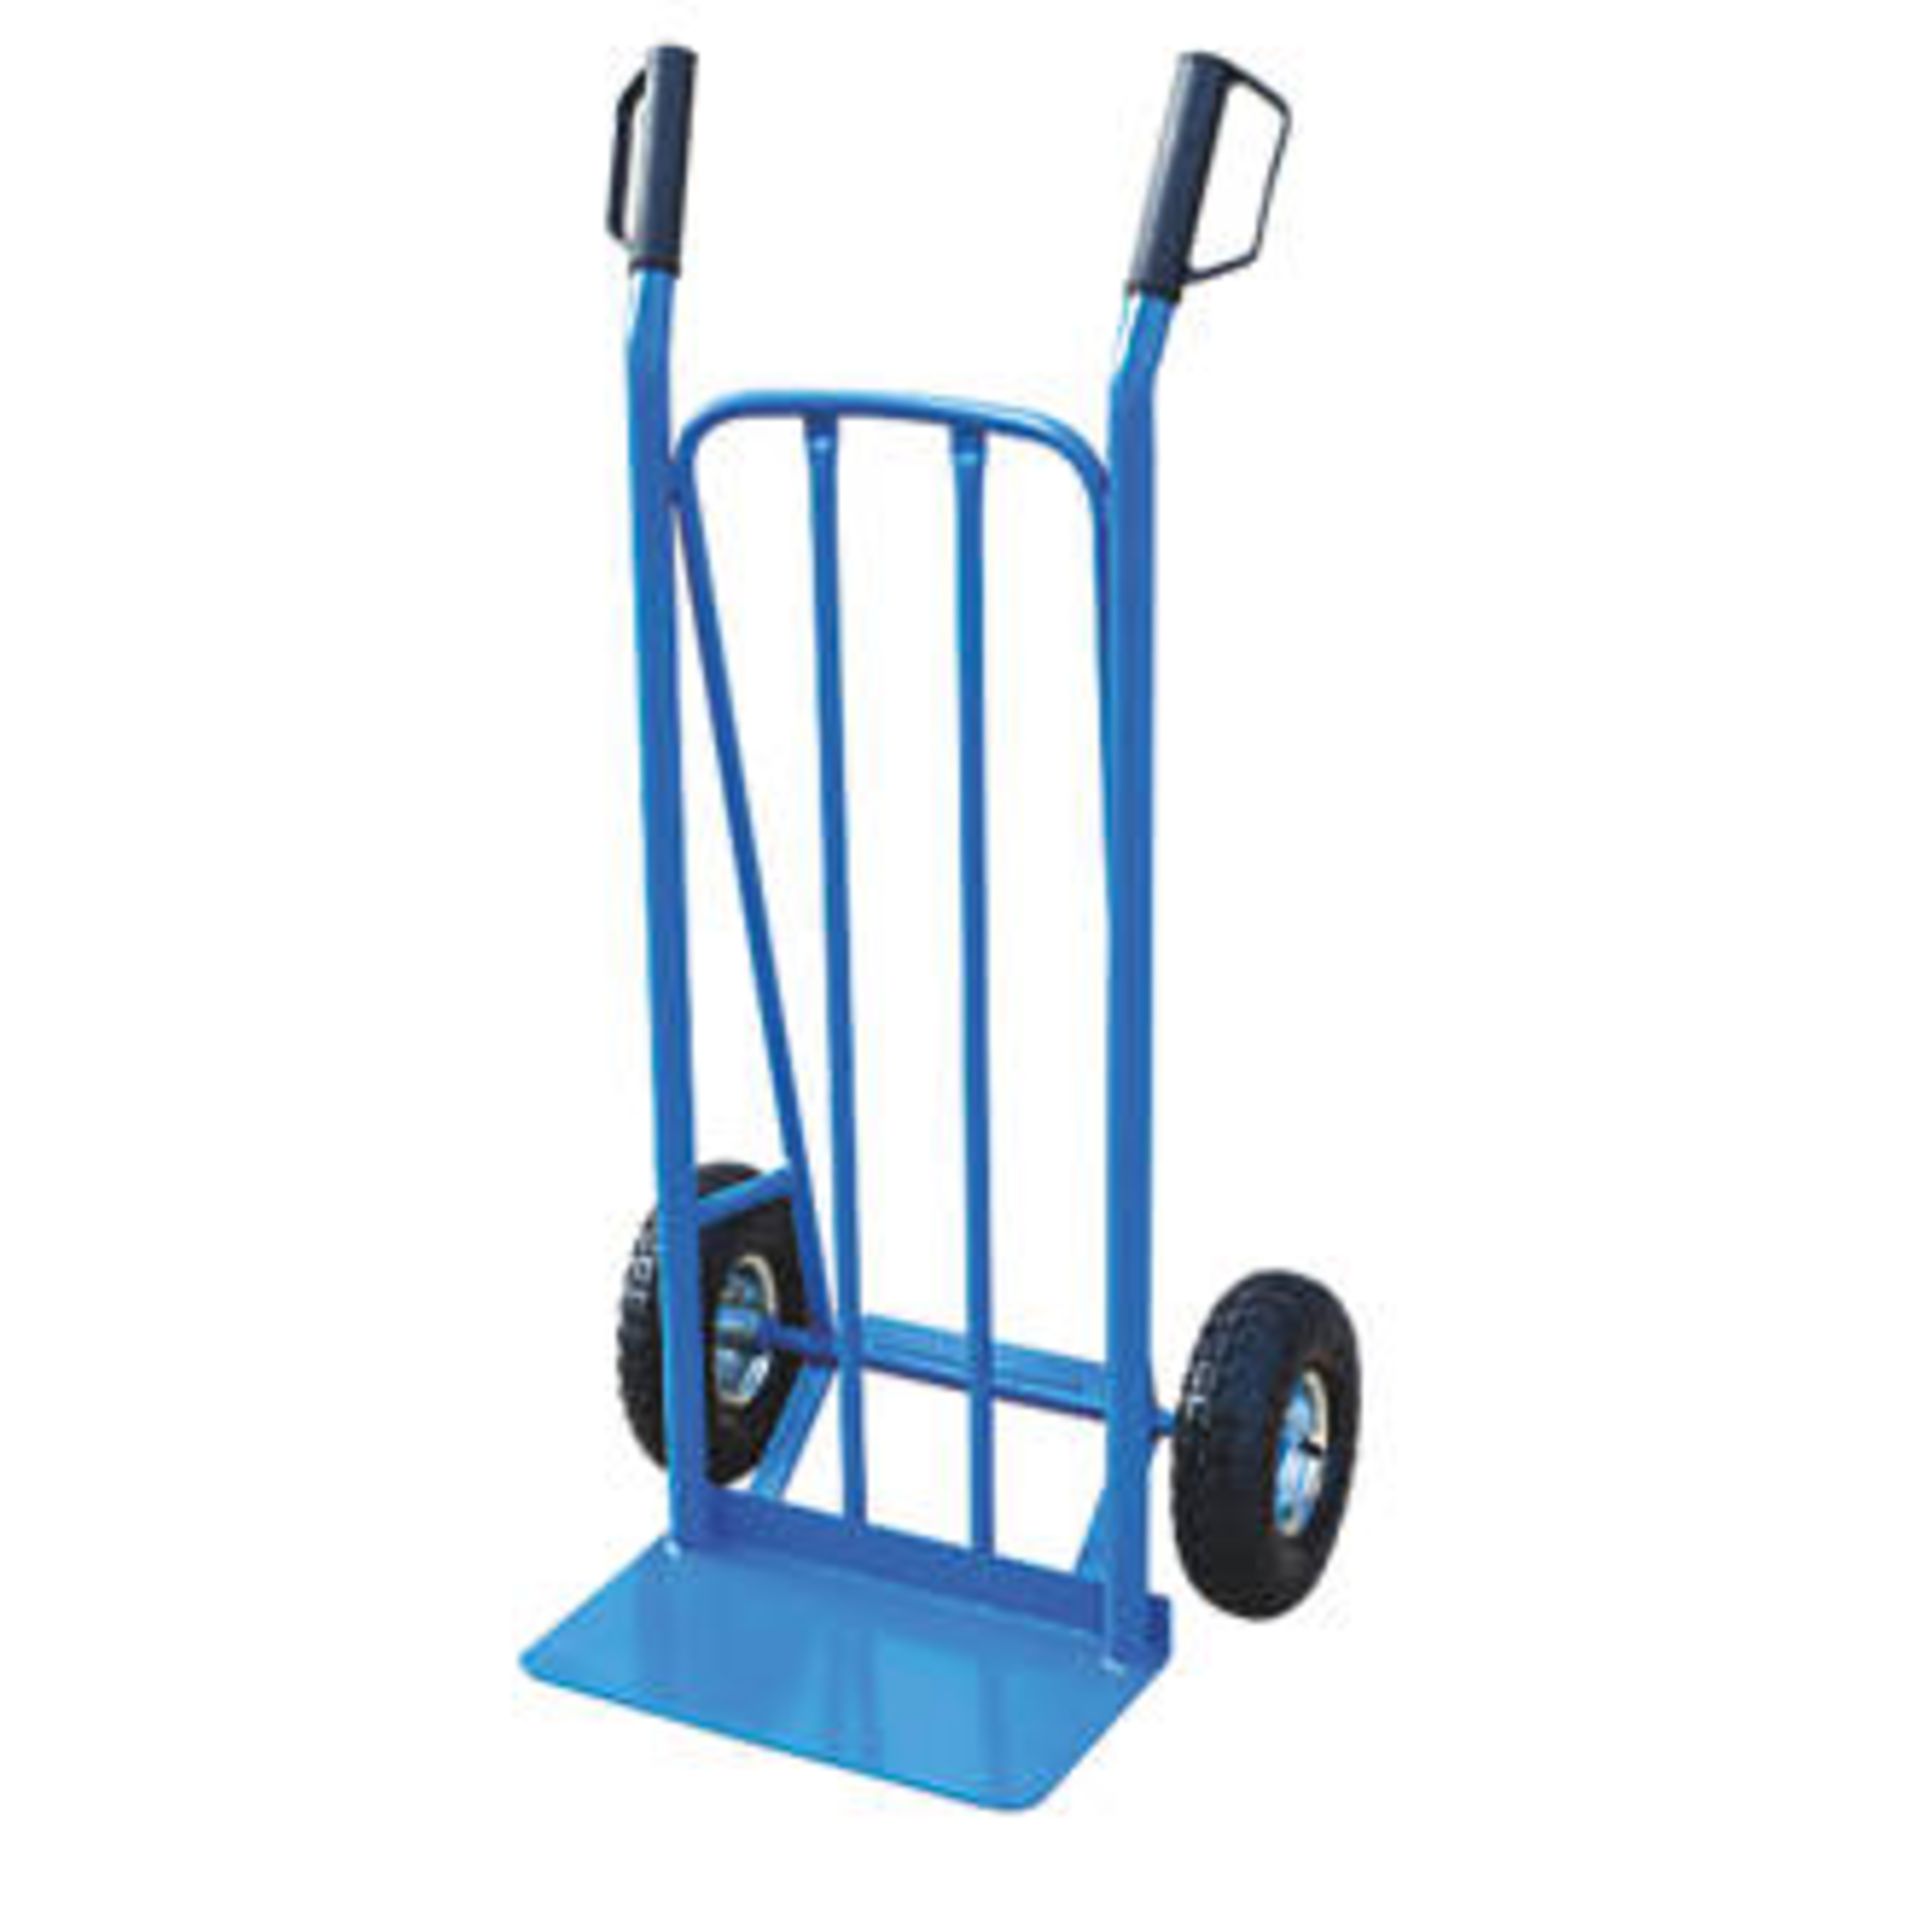 HEAVY DUTY HAND TRUCK 300KG RRP £44.99Condition ReportAppraisal Available on Request- All Items